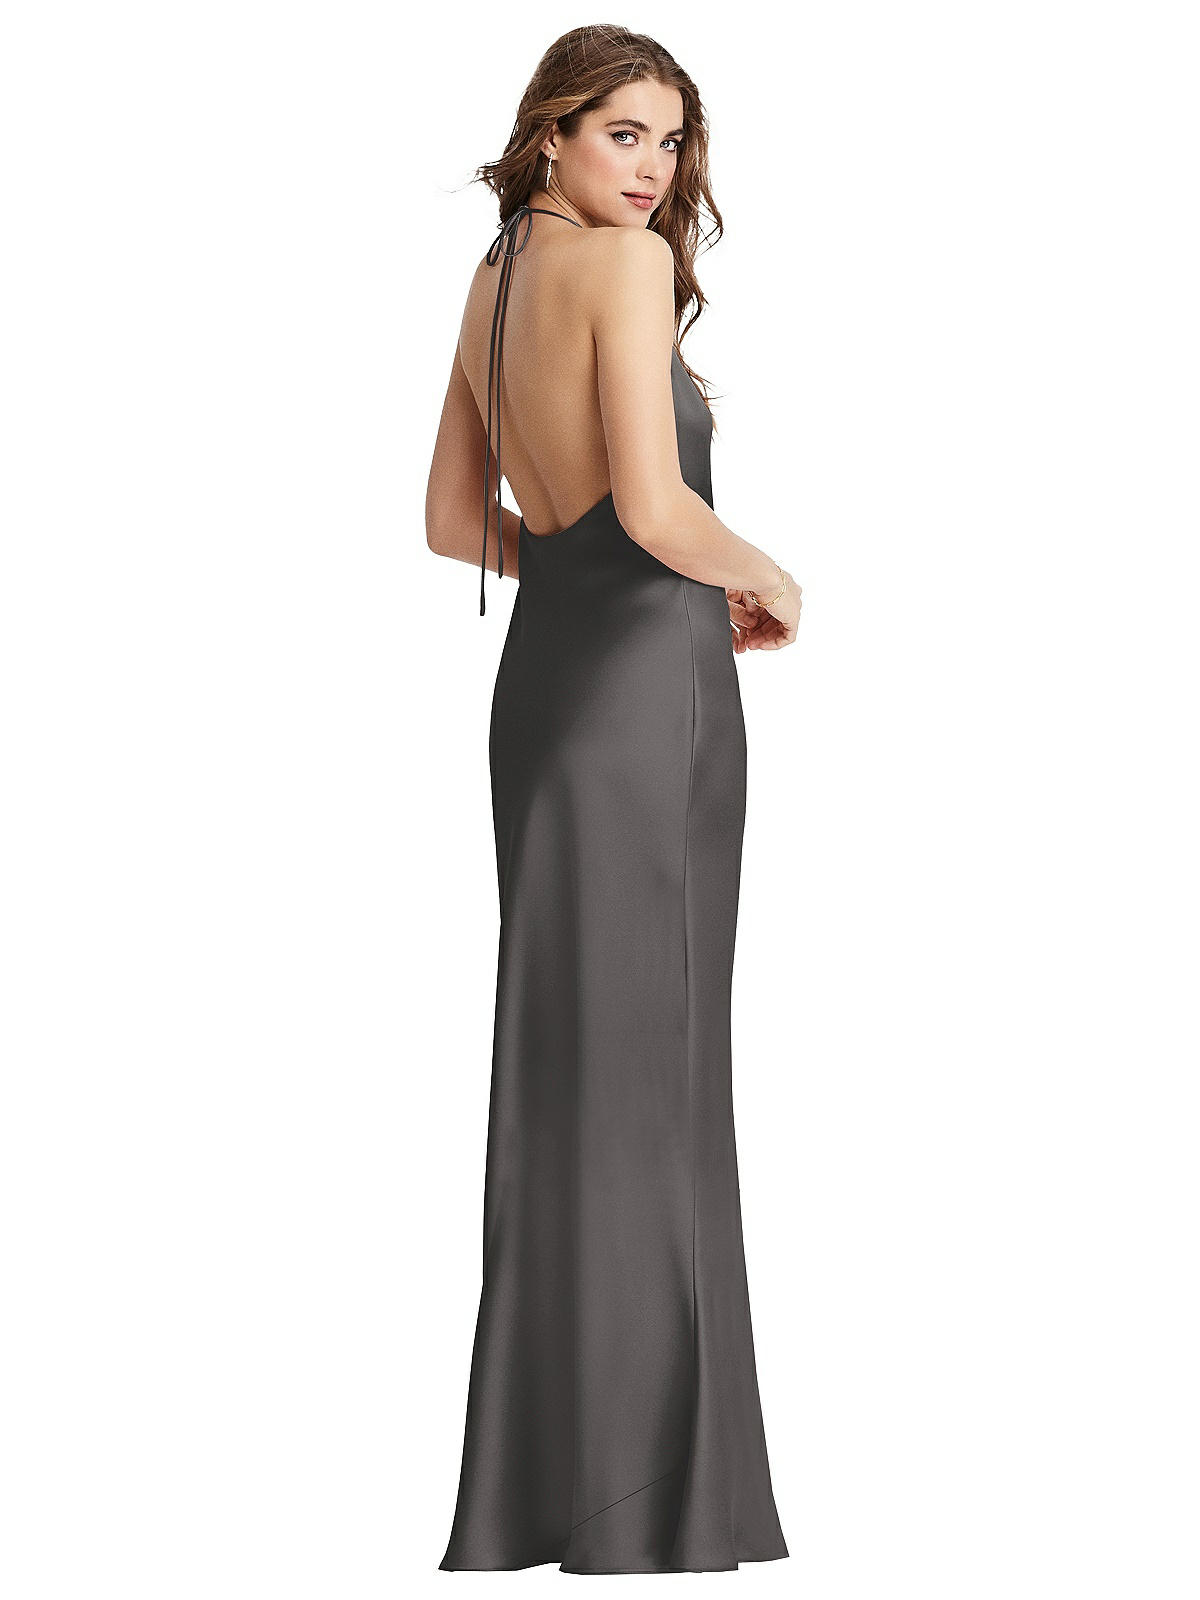 Special Order Cowl Neck Convertible Maxi Slip Dress - Reese